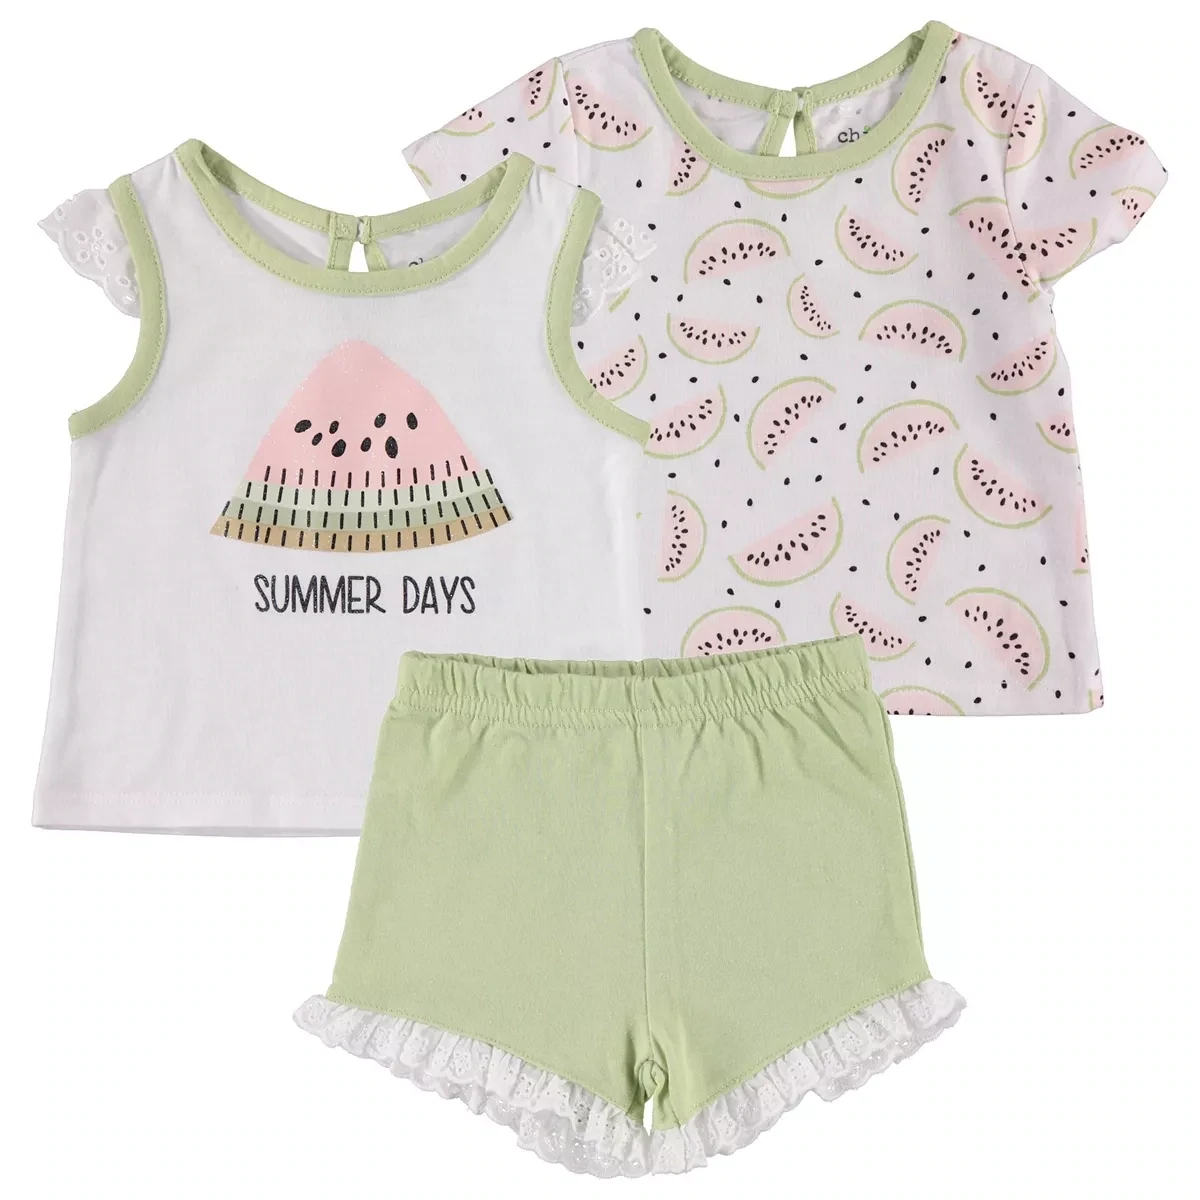 Chickpea Baby Girls Tops and Shorts, 3 Piece Set - Green, Size 12 Months